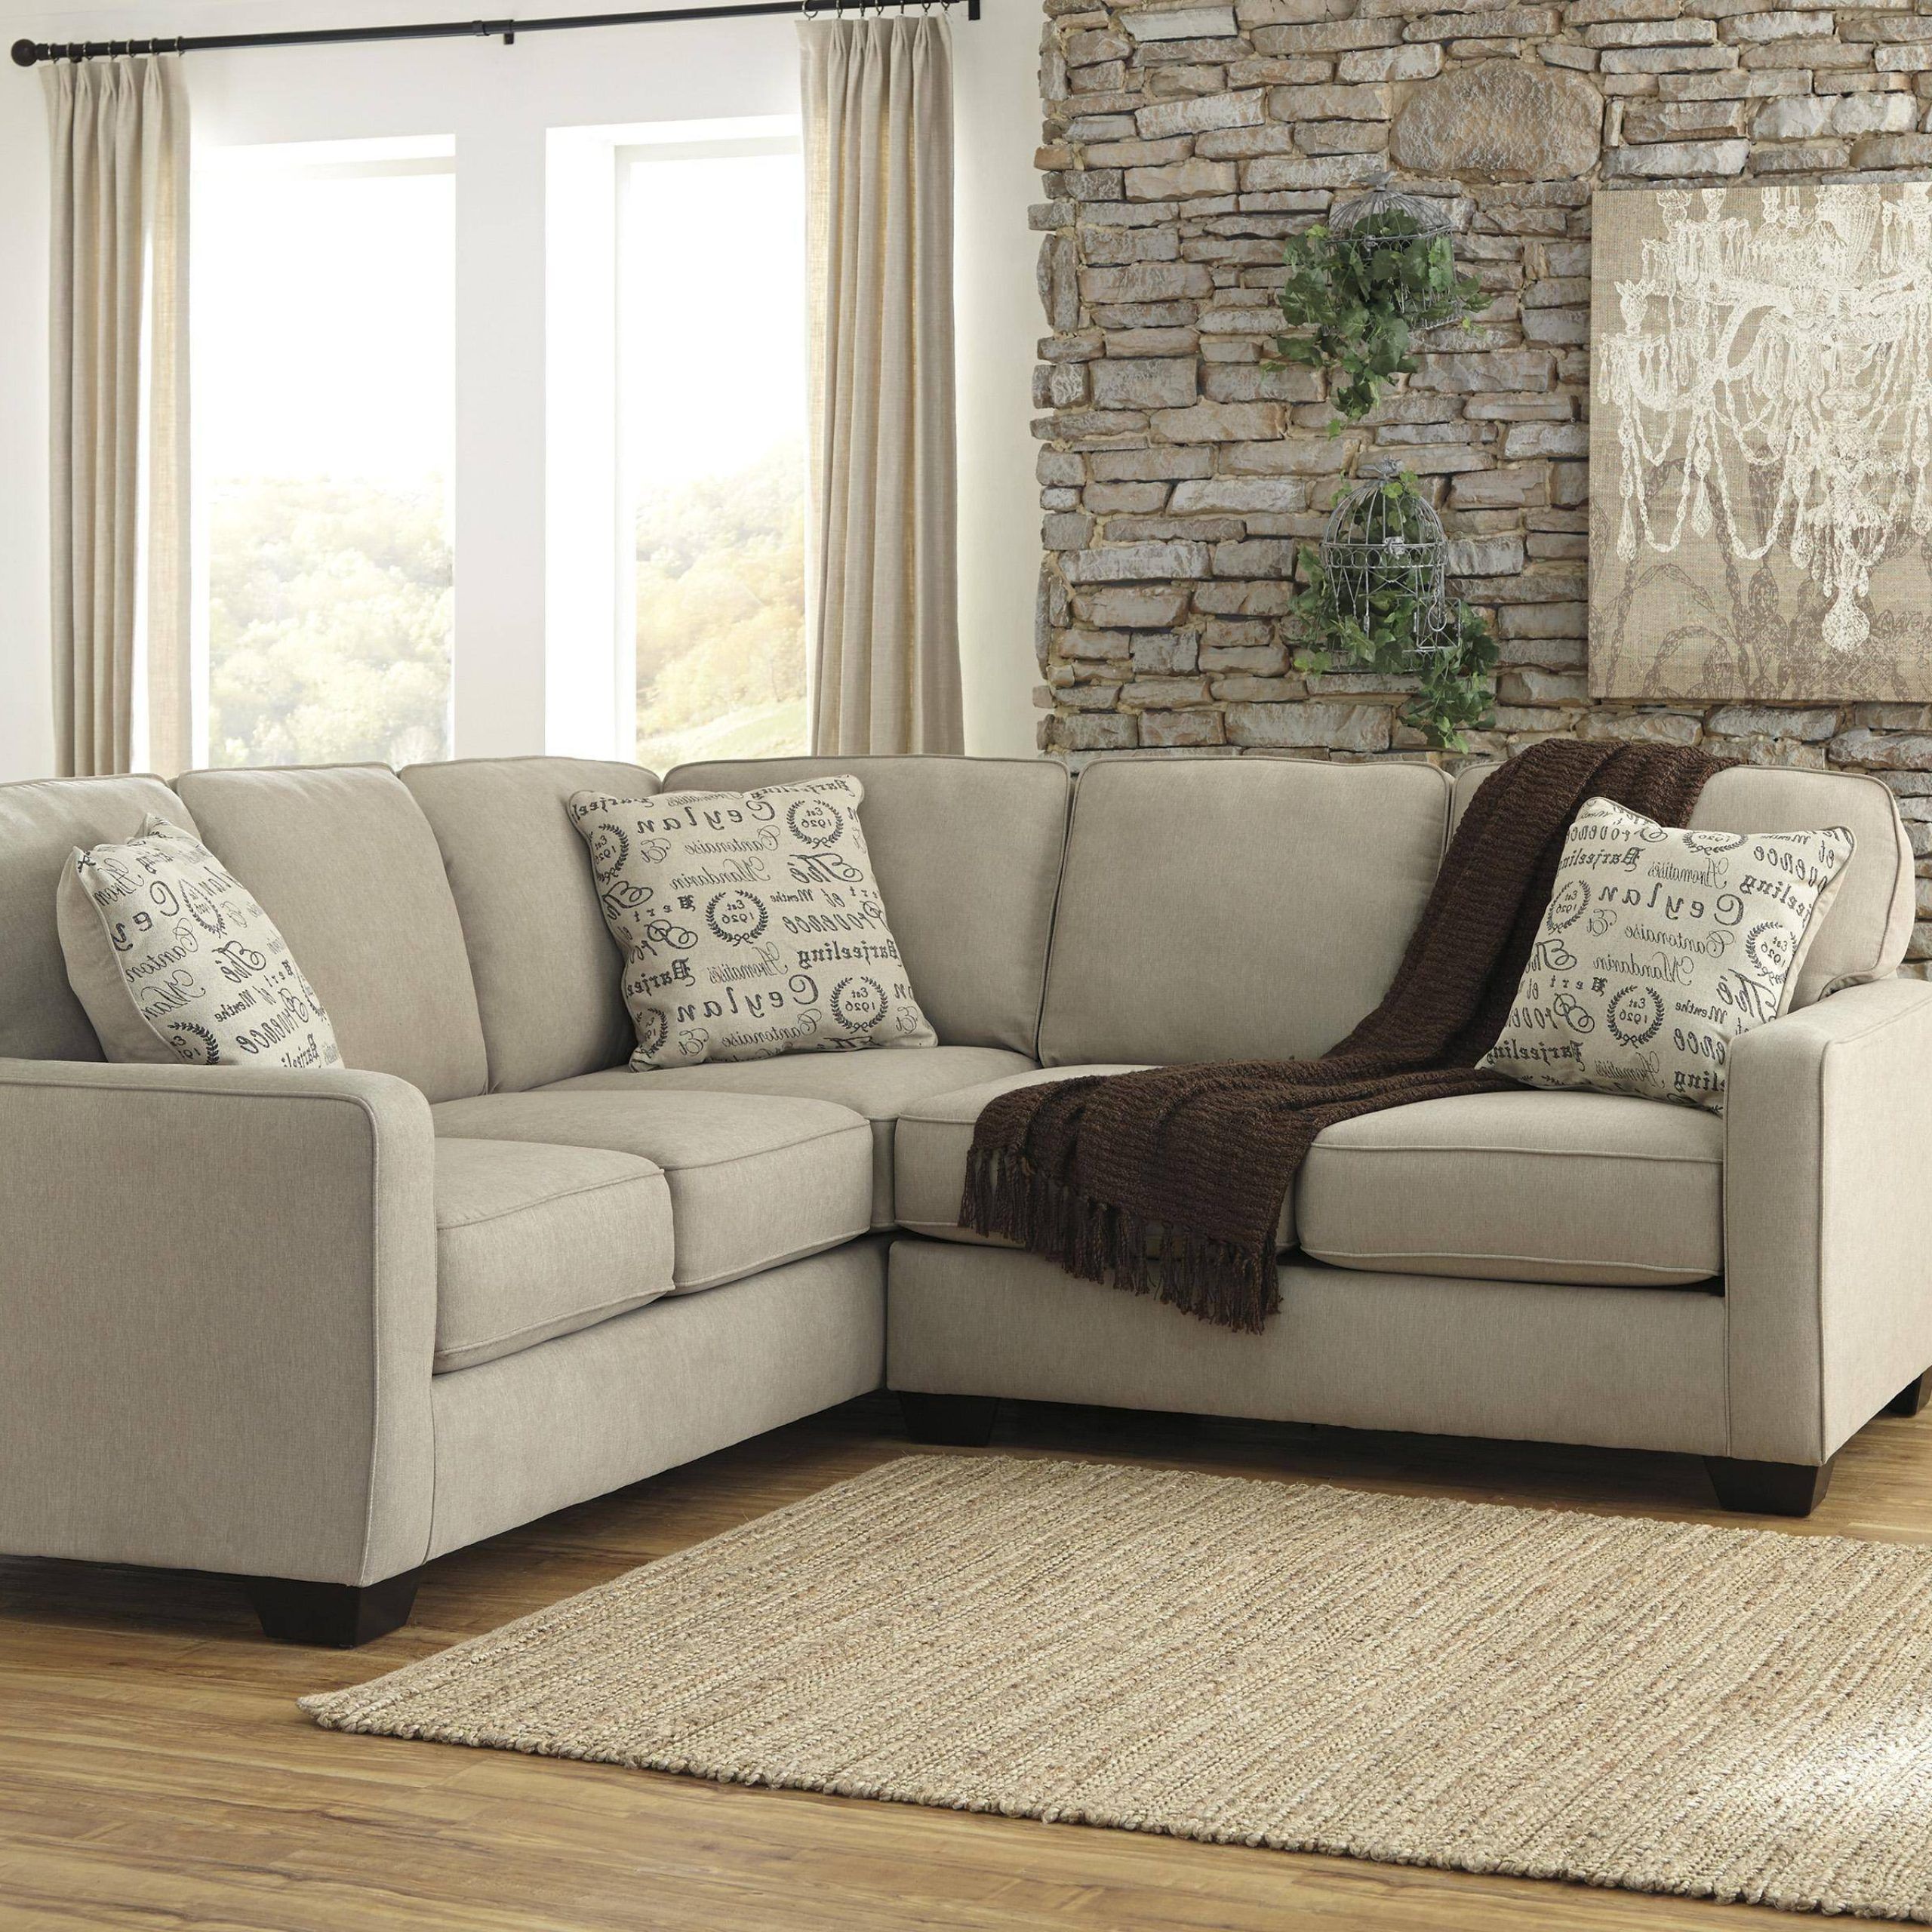 Buy Ashley Alenya Sectional Sofa Left Hand Chase In Quartz, Linen Online For Small L Shaped Sectional Sofas In Beige (Gallery 13 of 20)